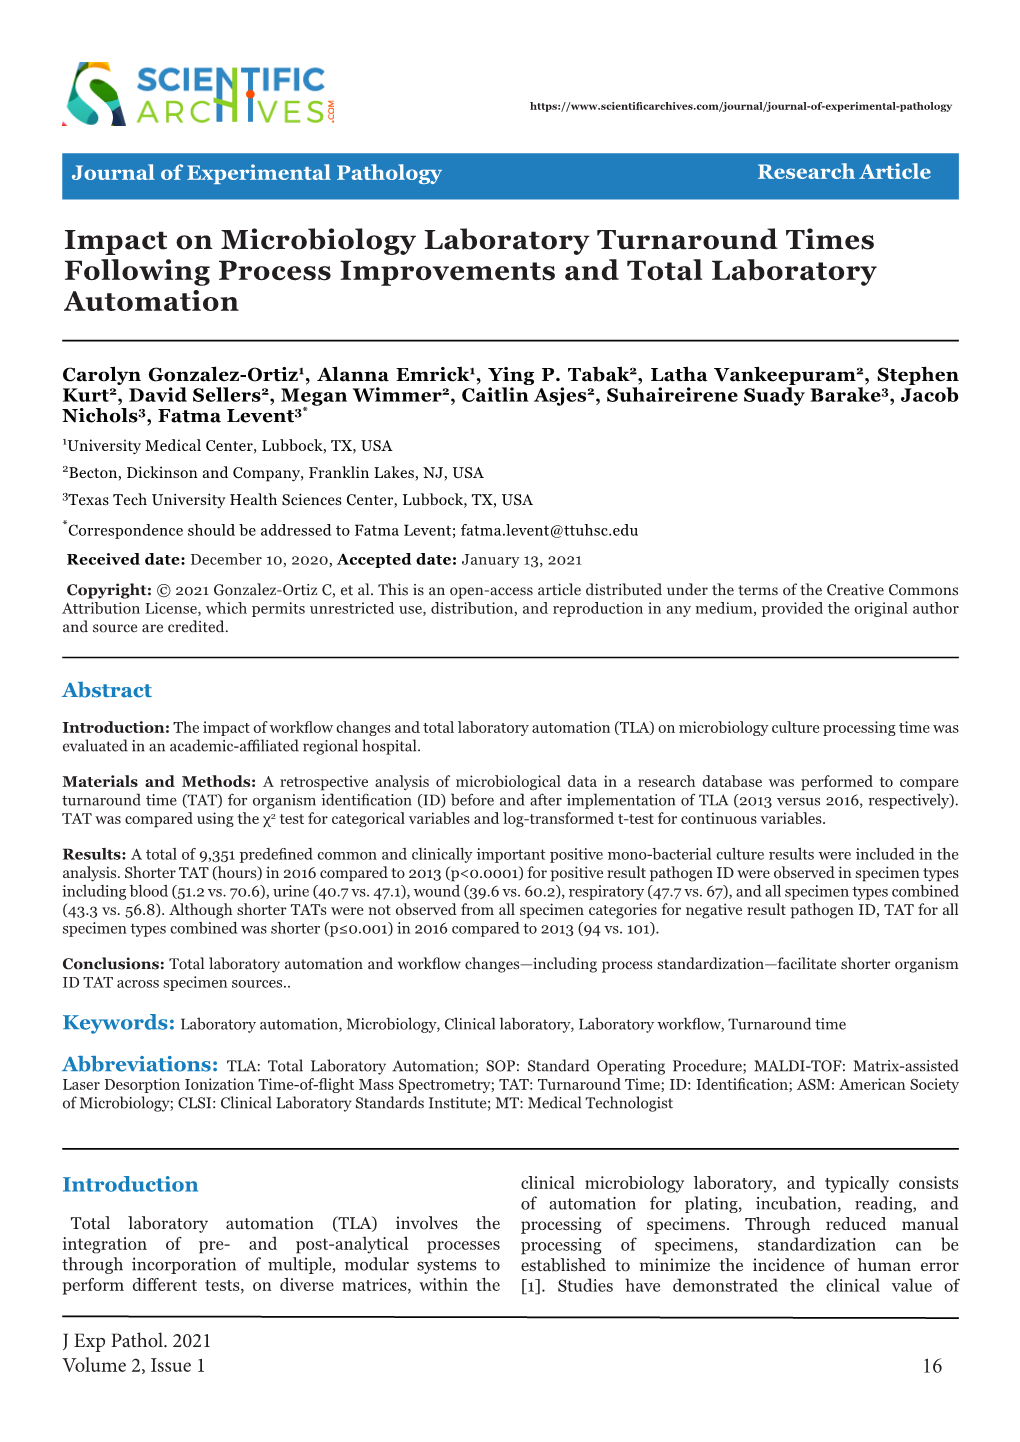 Impact on Microbiology Laboratory Turnaround Times Following Process Improvements and Total Laboratory Automation